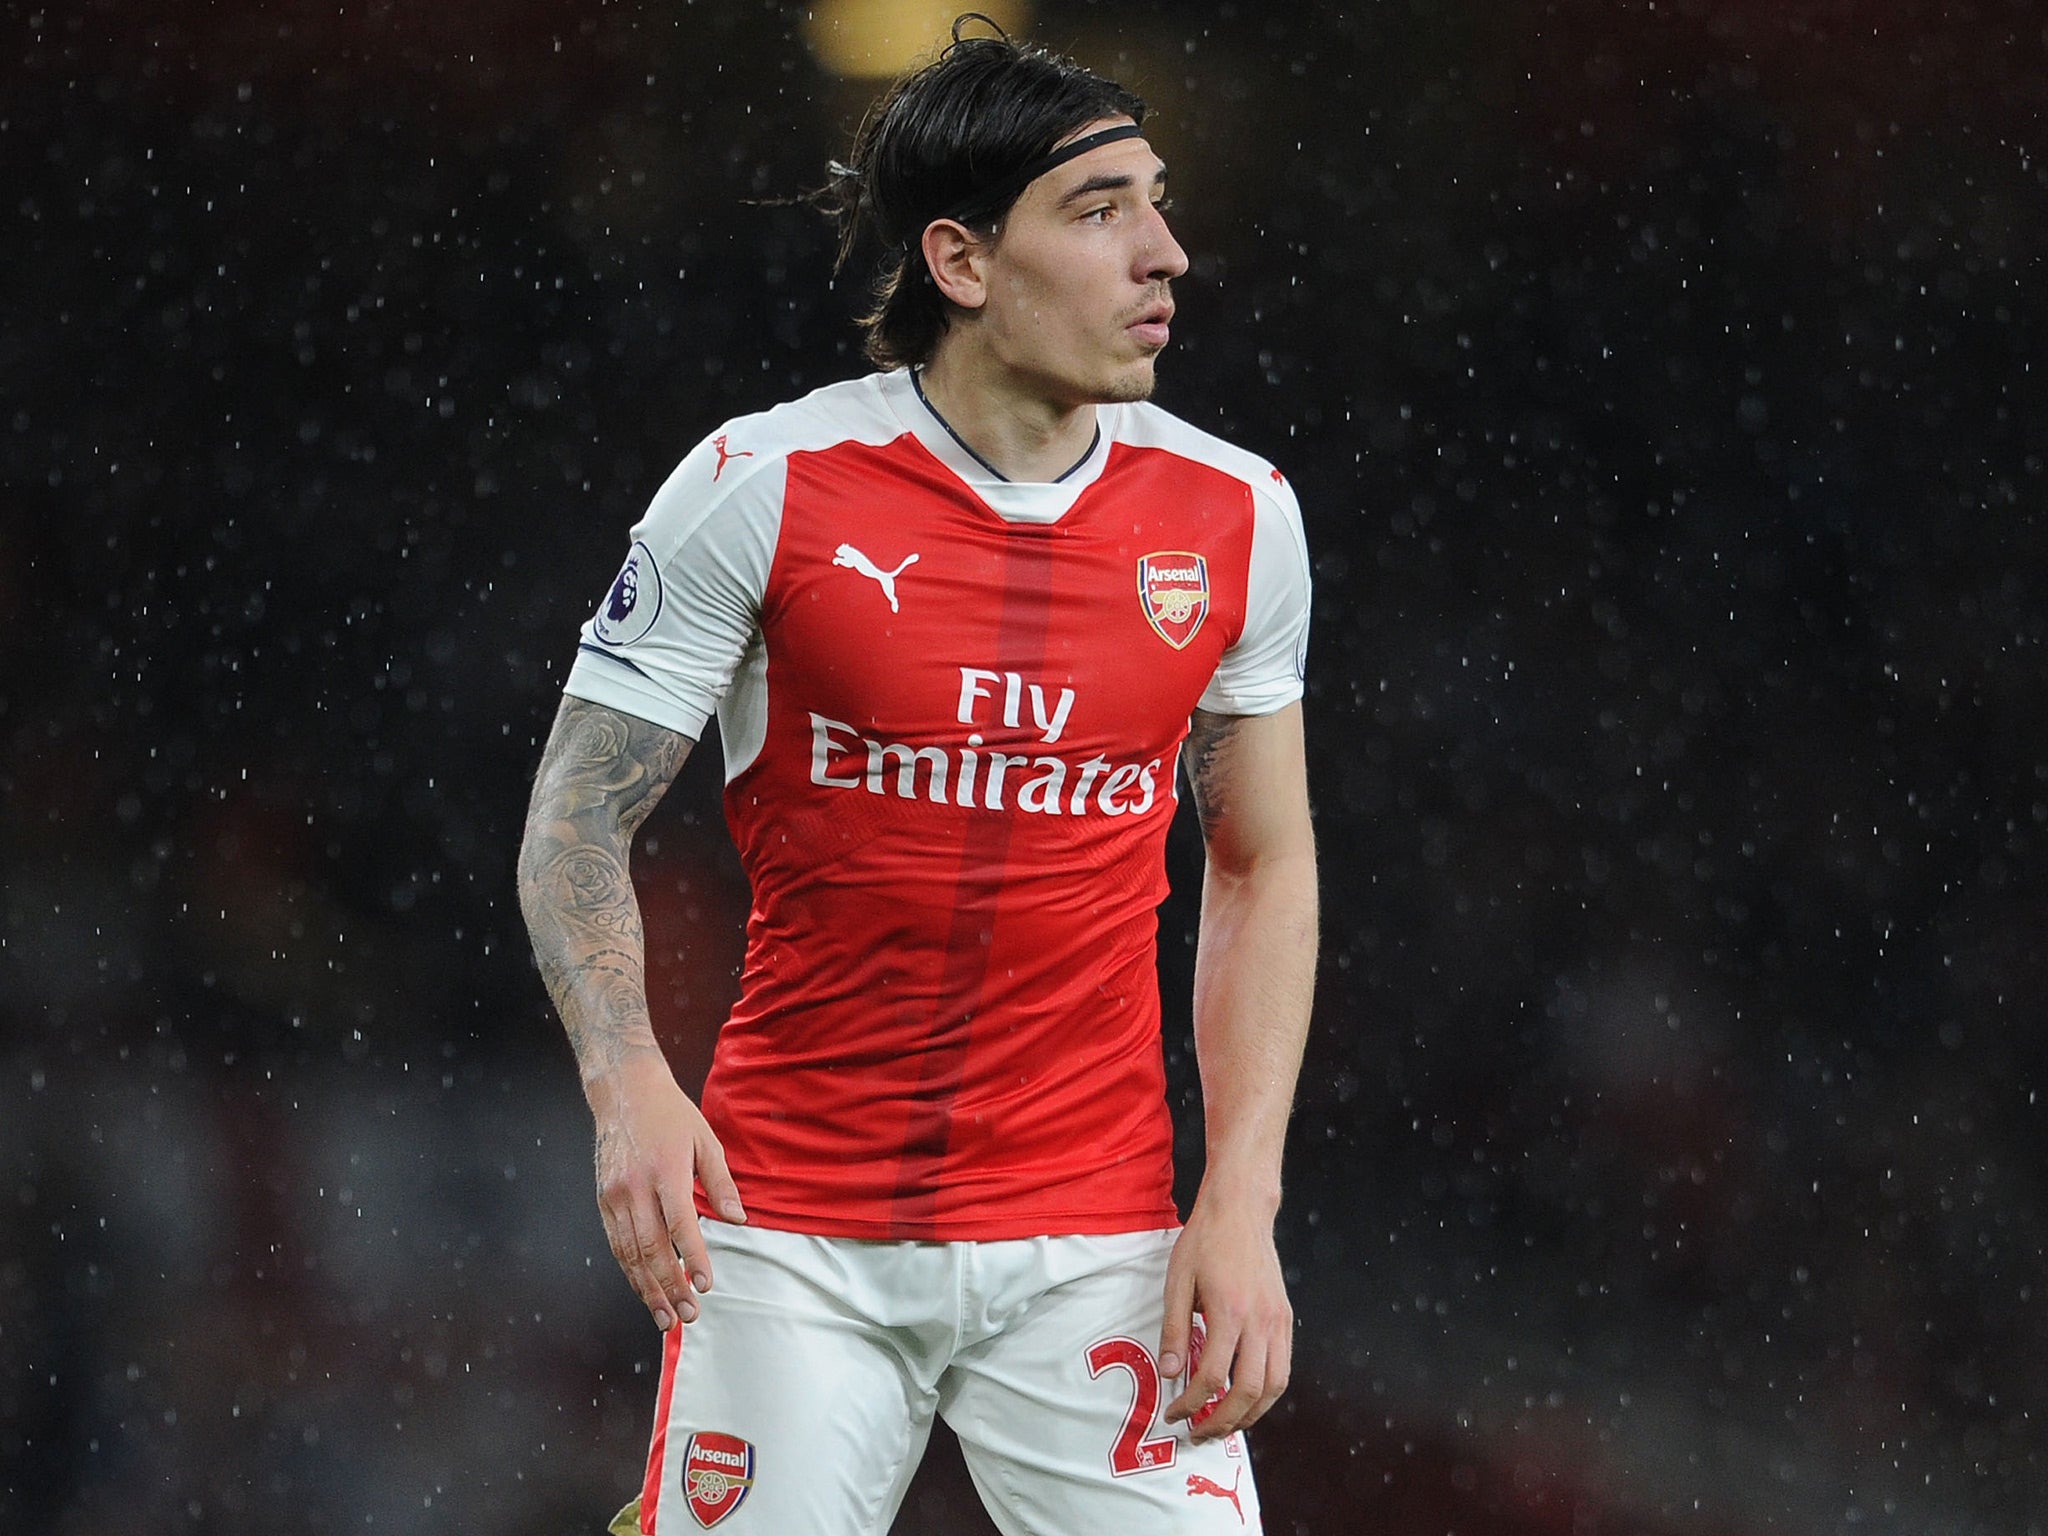 Hector Bellerin is keen to accept the call-up and represent his country's Under-21 side